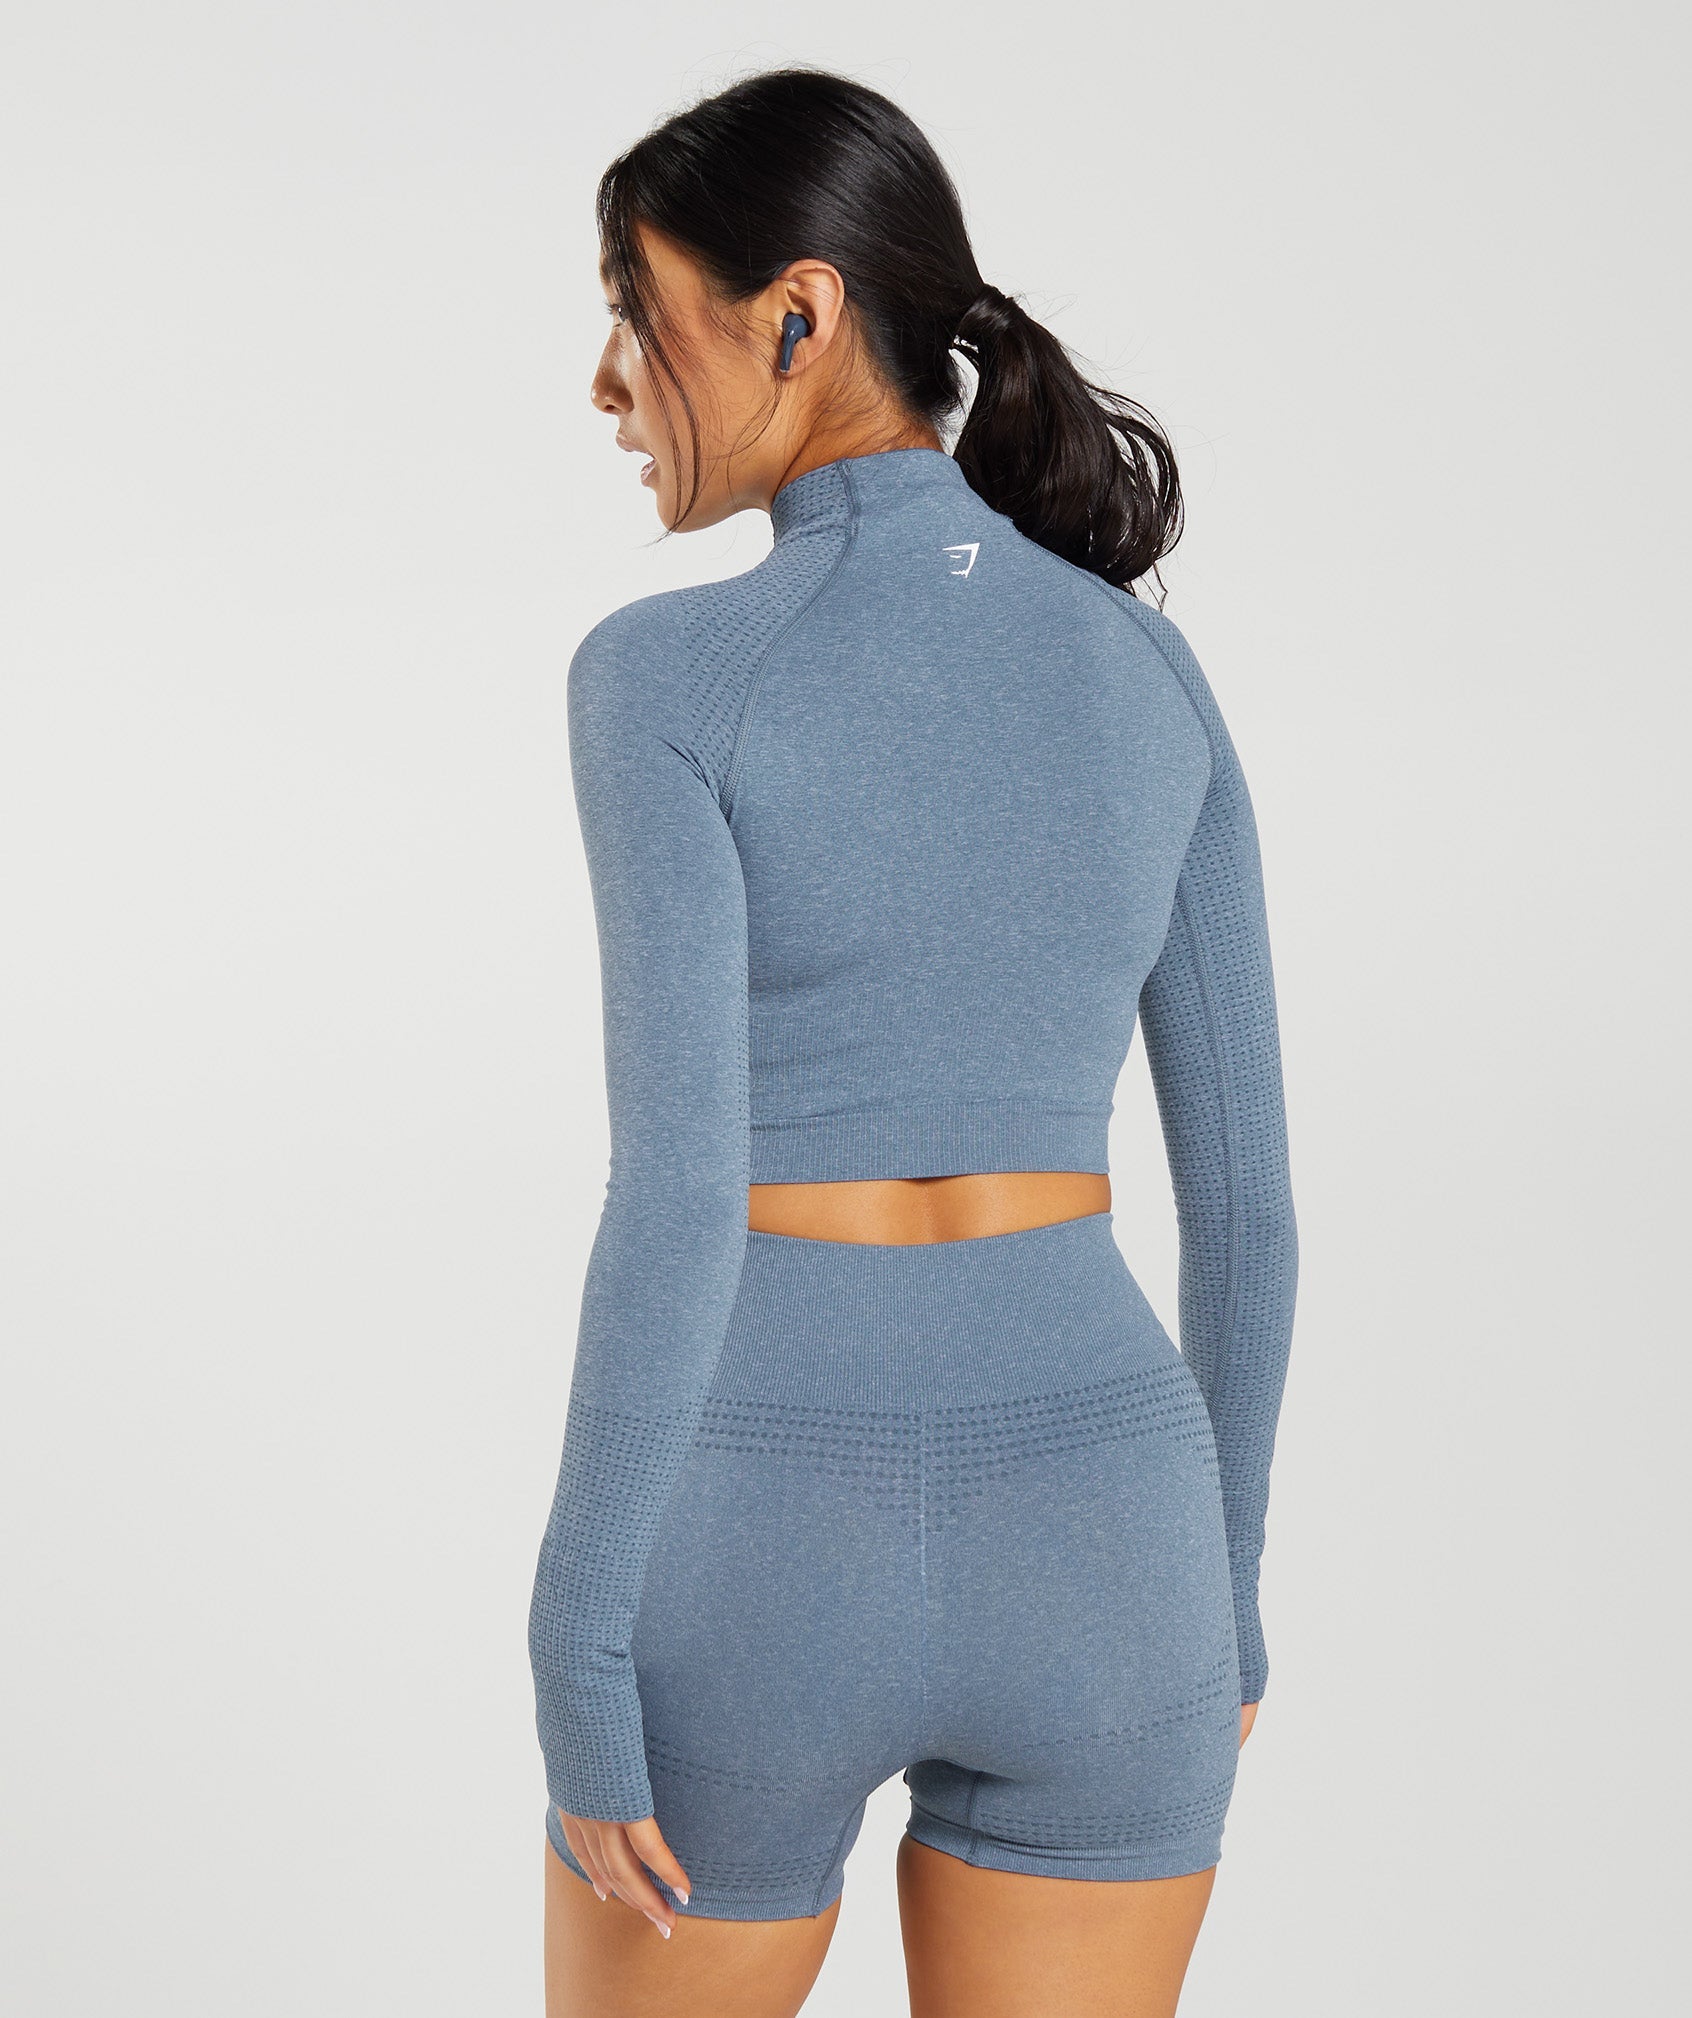 Vital Seamless 2.0 High Neck Midi Top in Evening Blue - view 2